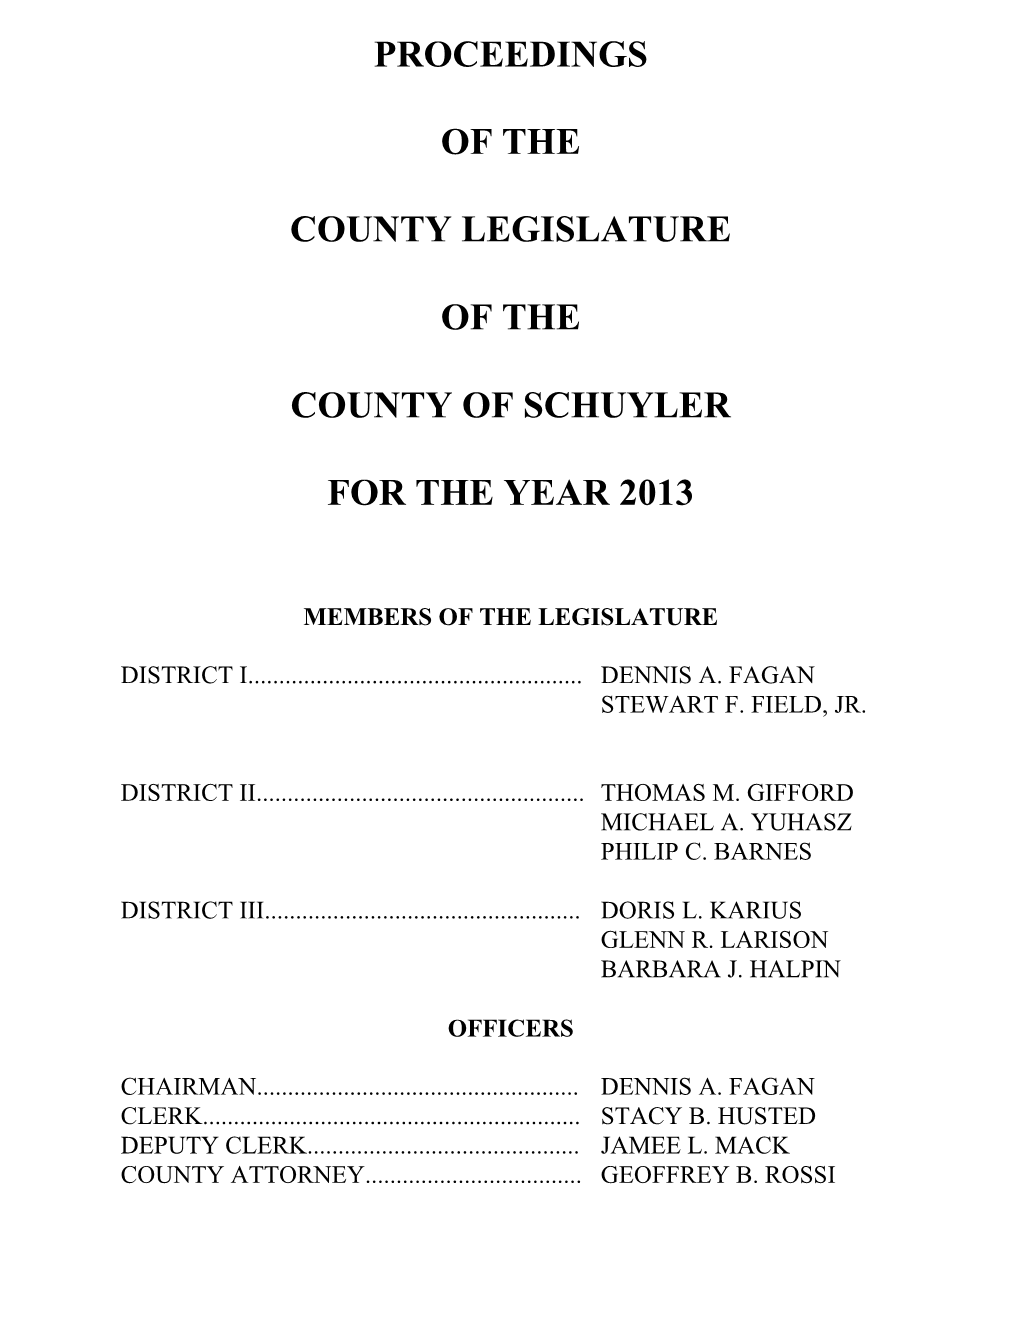 Proceedings of the County Legislature of the County of Schuyler for the Year 2013" Contain a Tribute to Beverly K